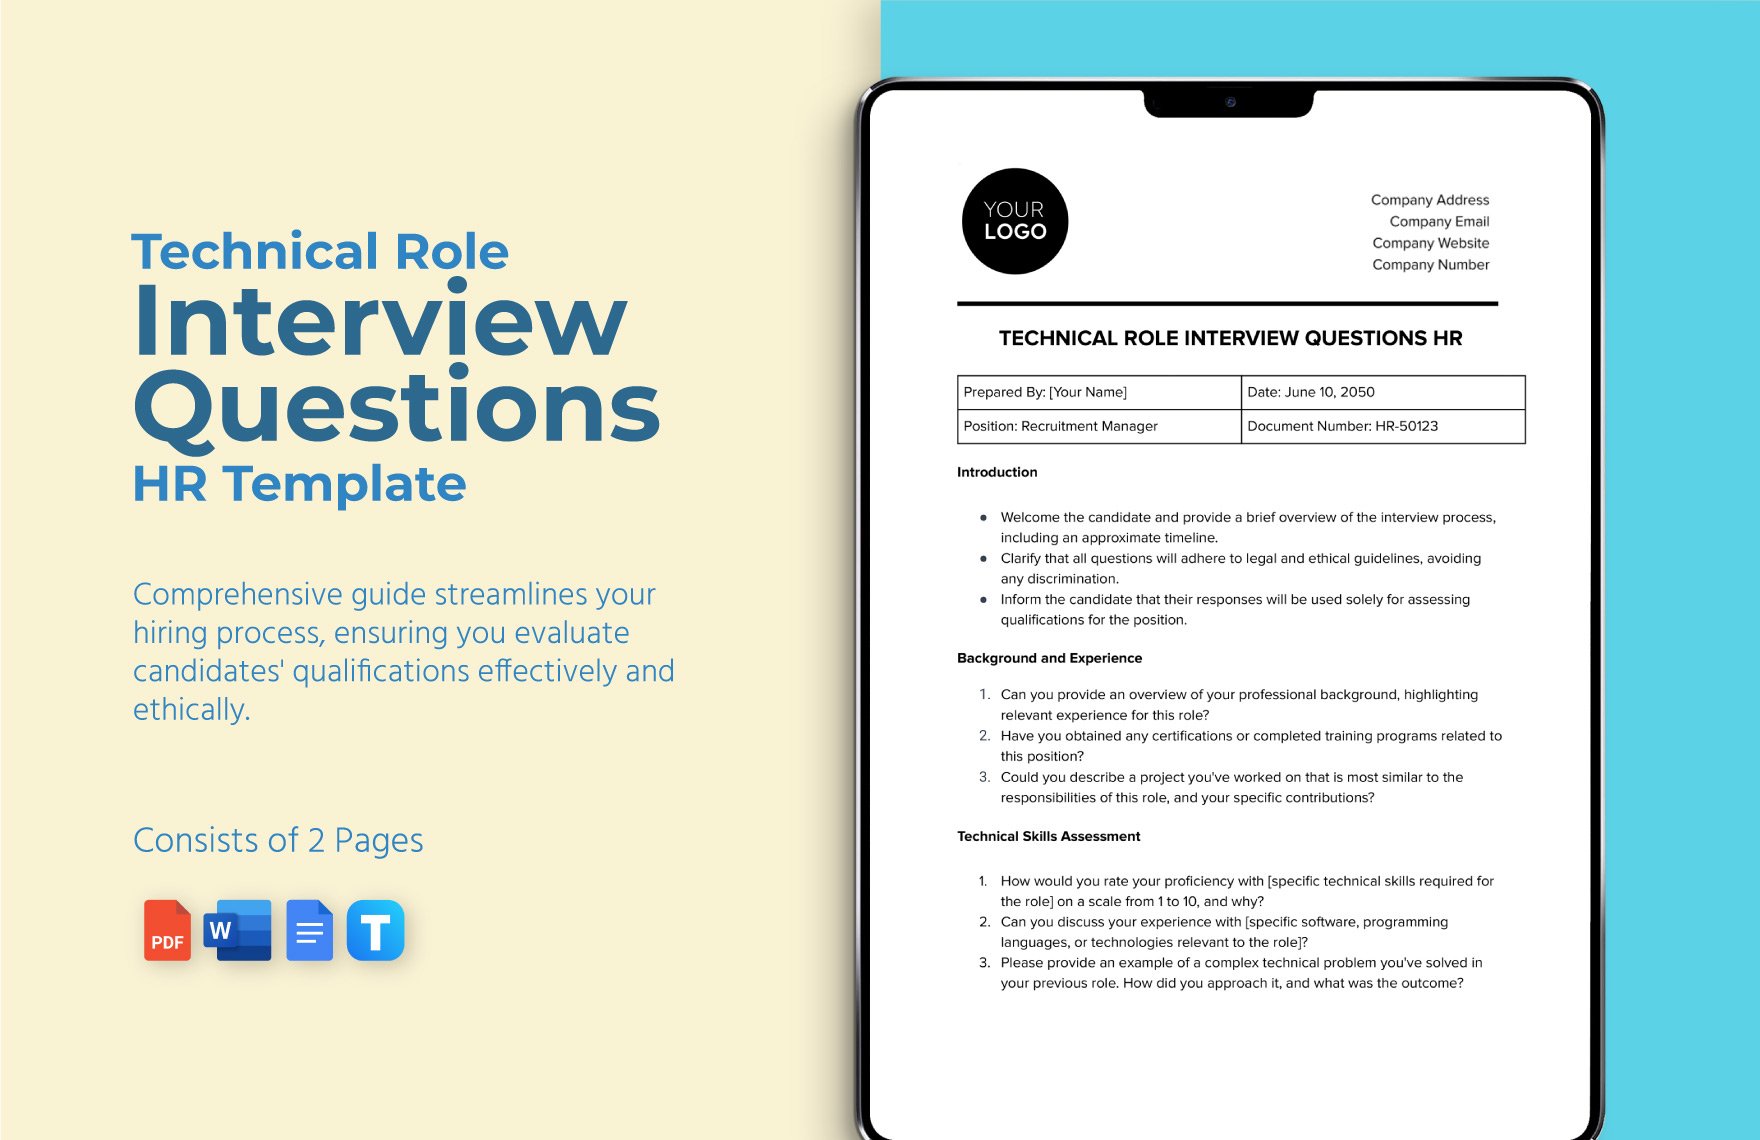 Technical Role Interview Questions HR Template